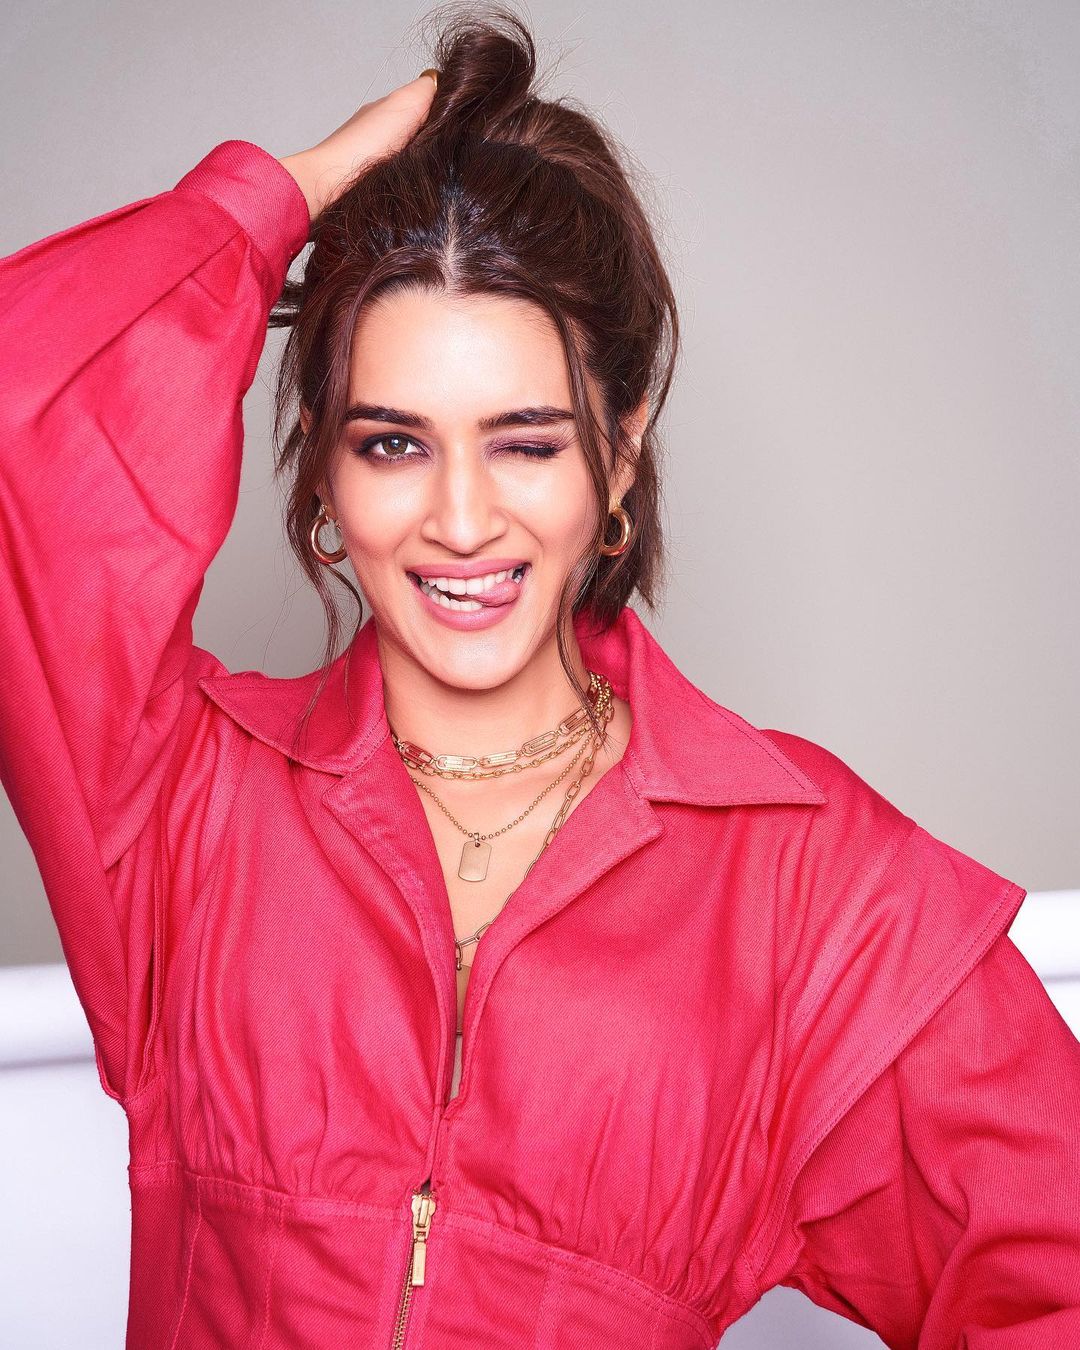 Kriti Sanon Is Going Through A Roller-Coaster Of Emotions In The Lockdown &  We Can Relate To Her